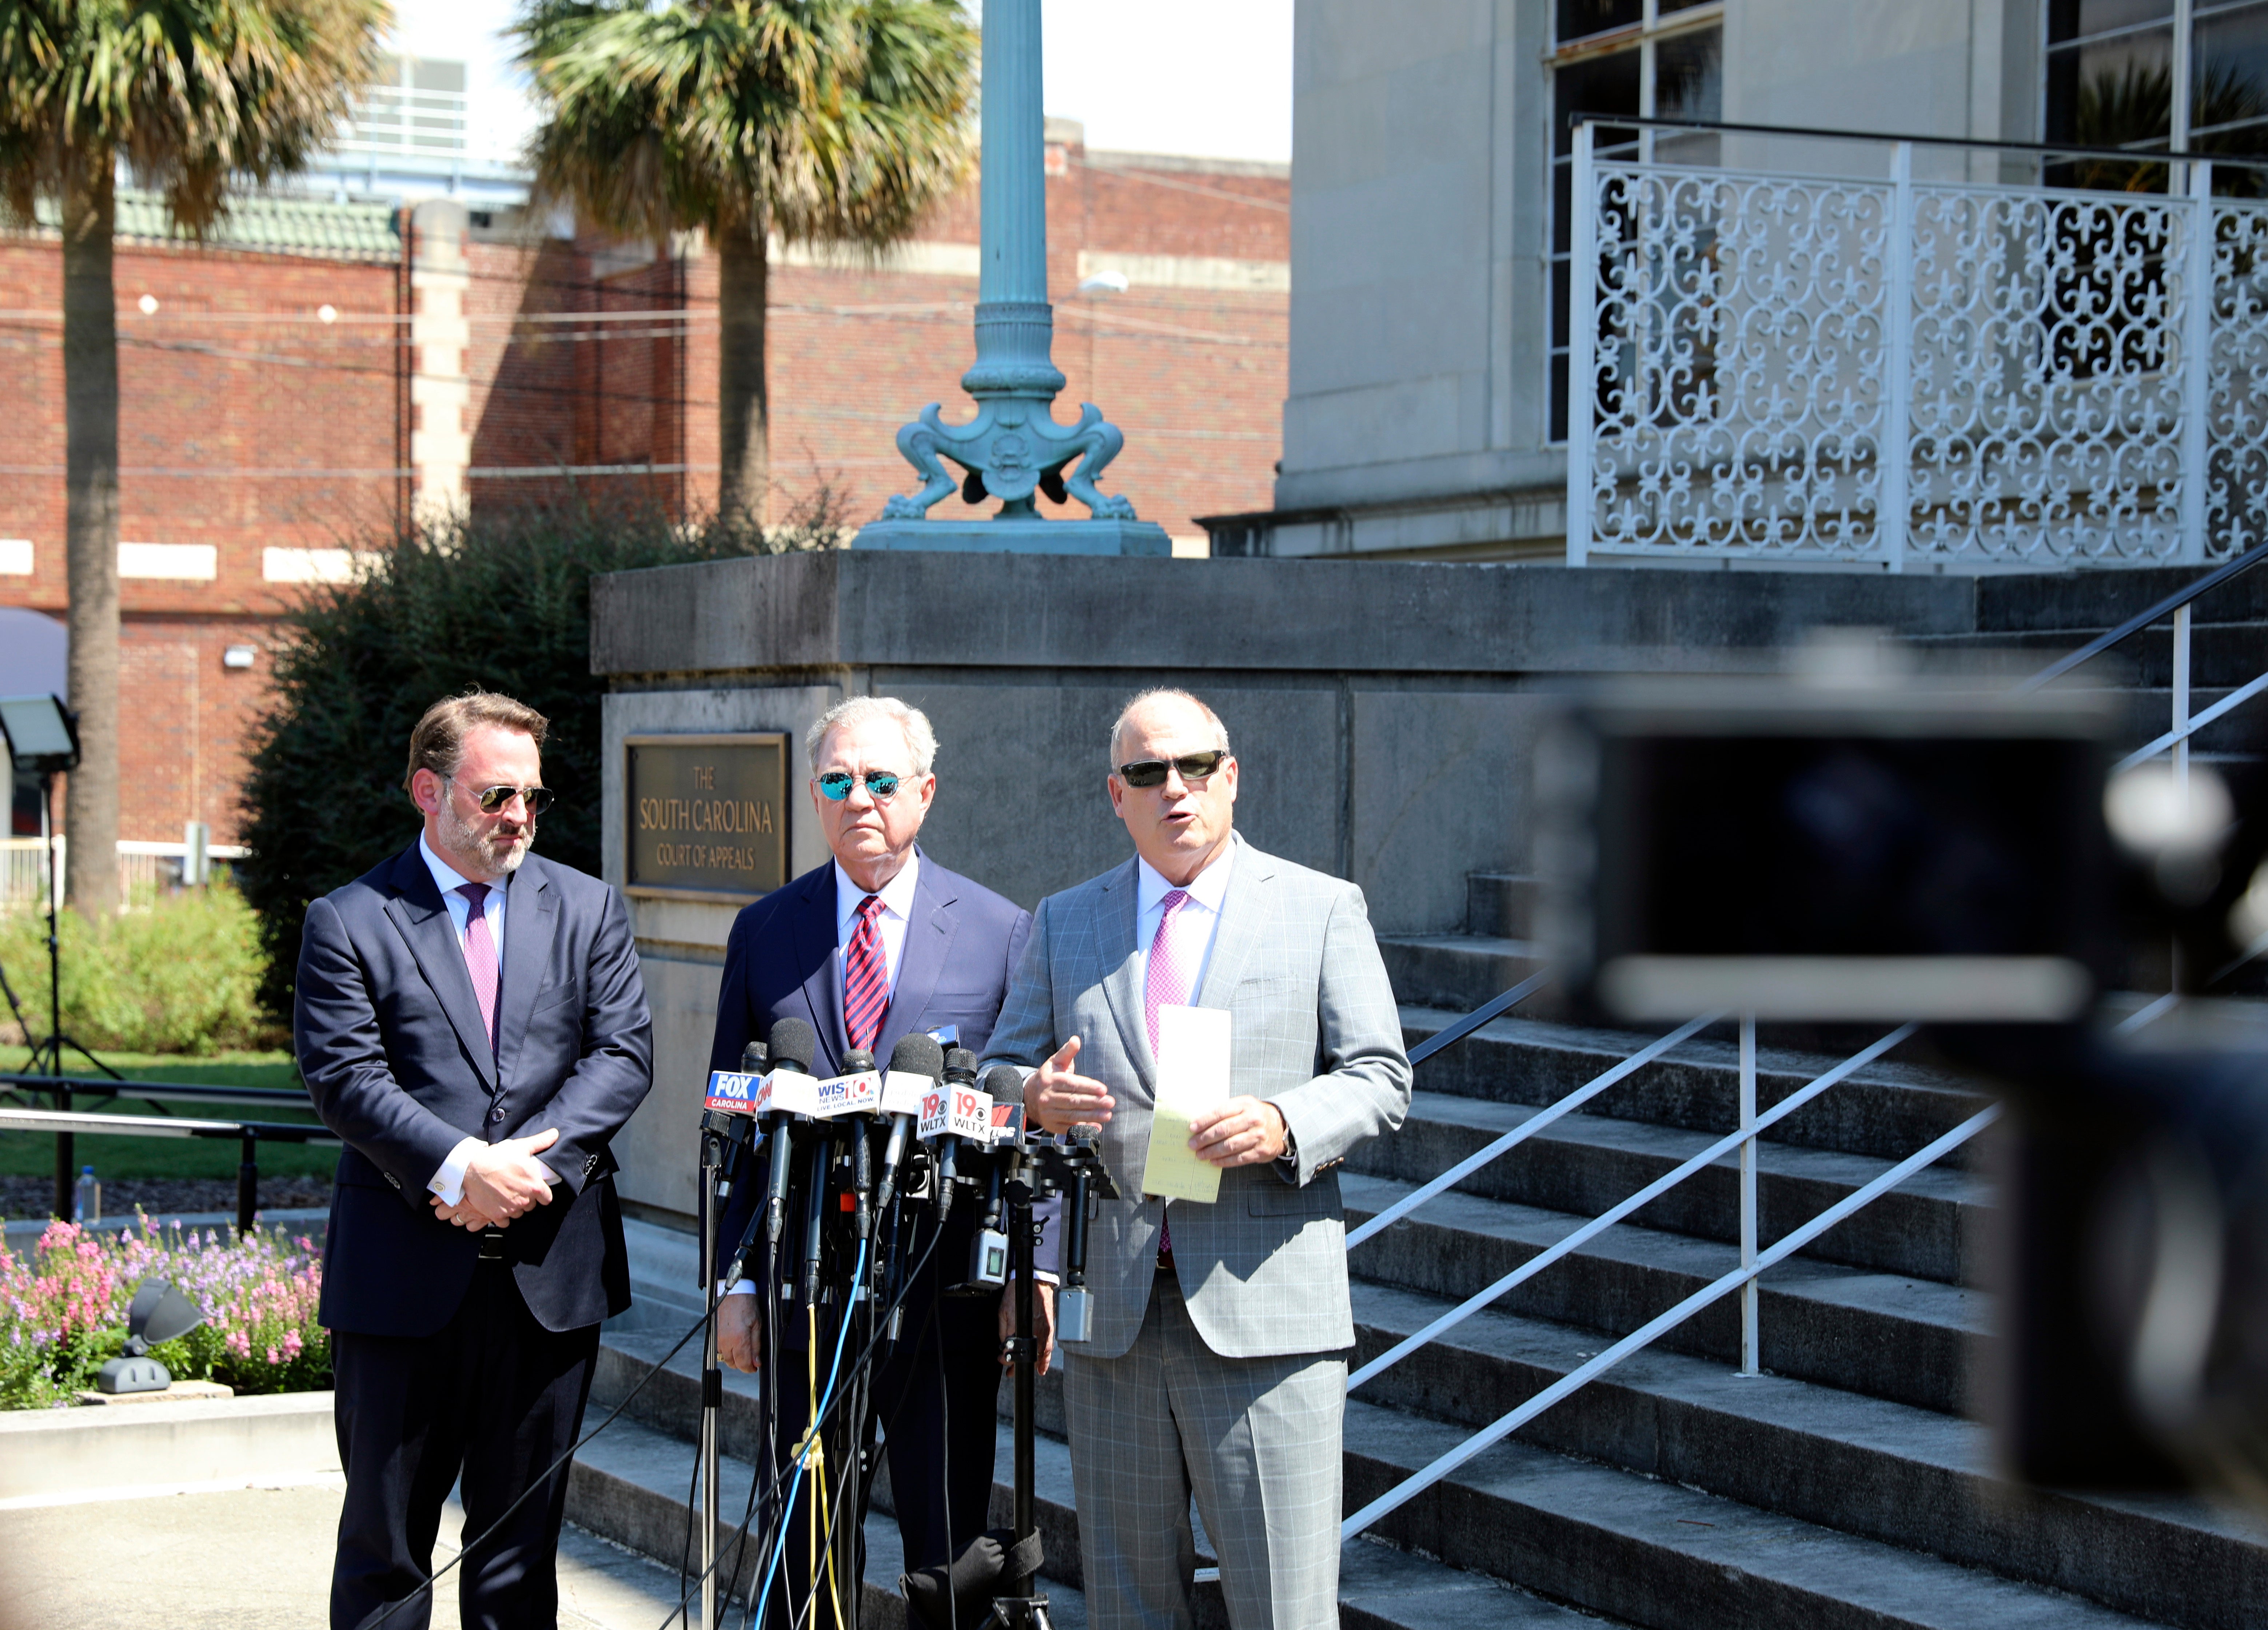 Alex Murdaugh’s attorneys Phillip Barber, from left, Dick Harpootlian and Jim Griffin at press conference announcing bid for new trial